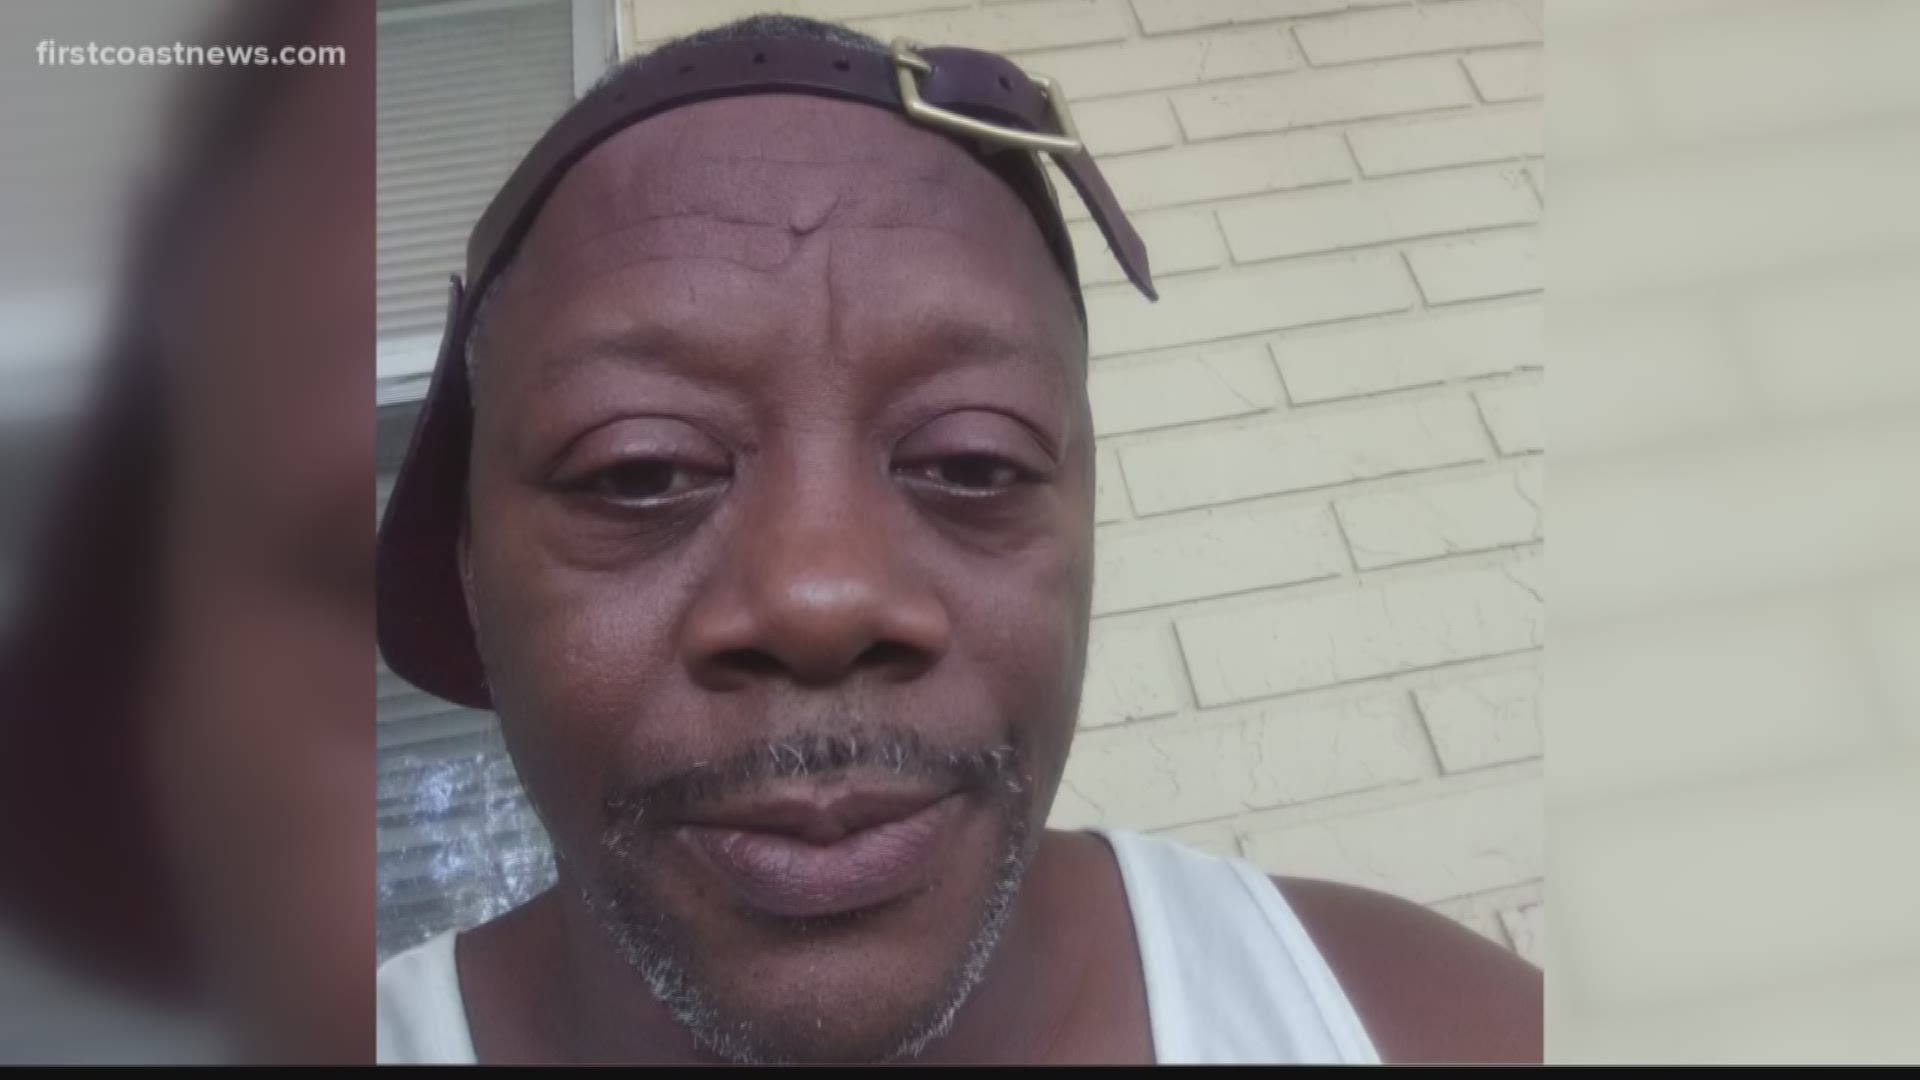 Rodney Reid was reportedly found dead with a gunshot wound in a home in the 2200 block of Grand Street around 3:45 p.m., family told First Coast News.